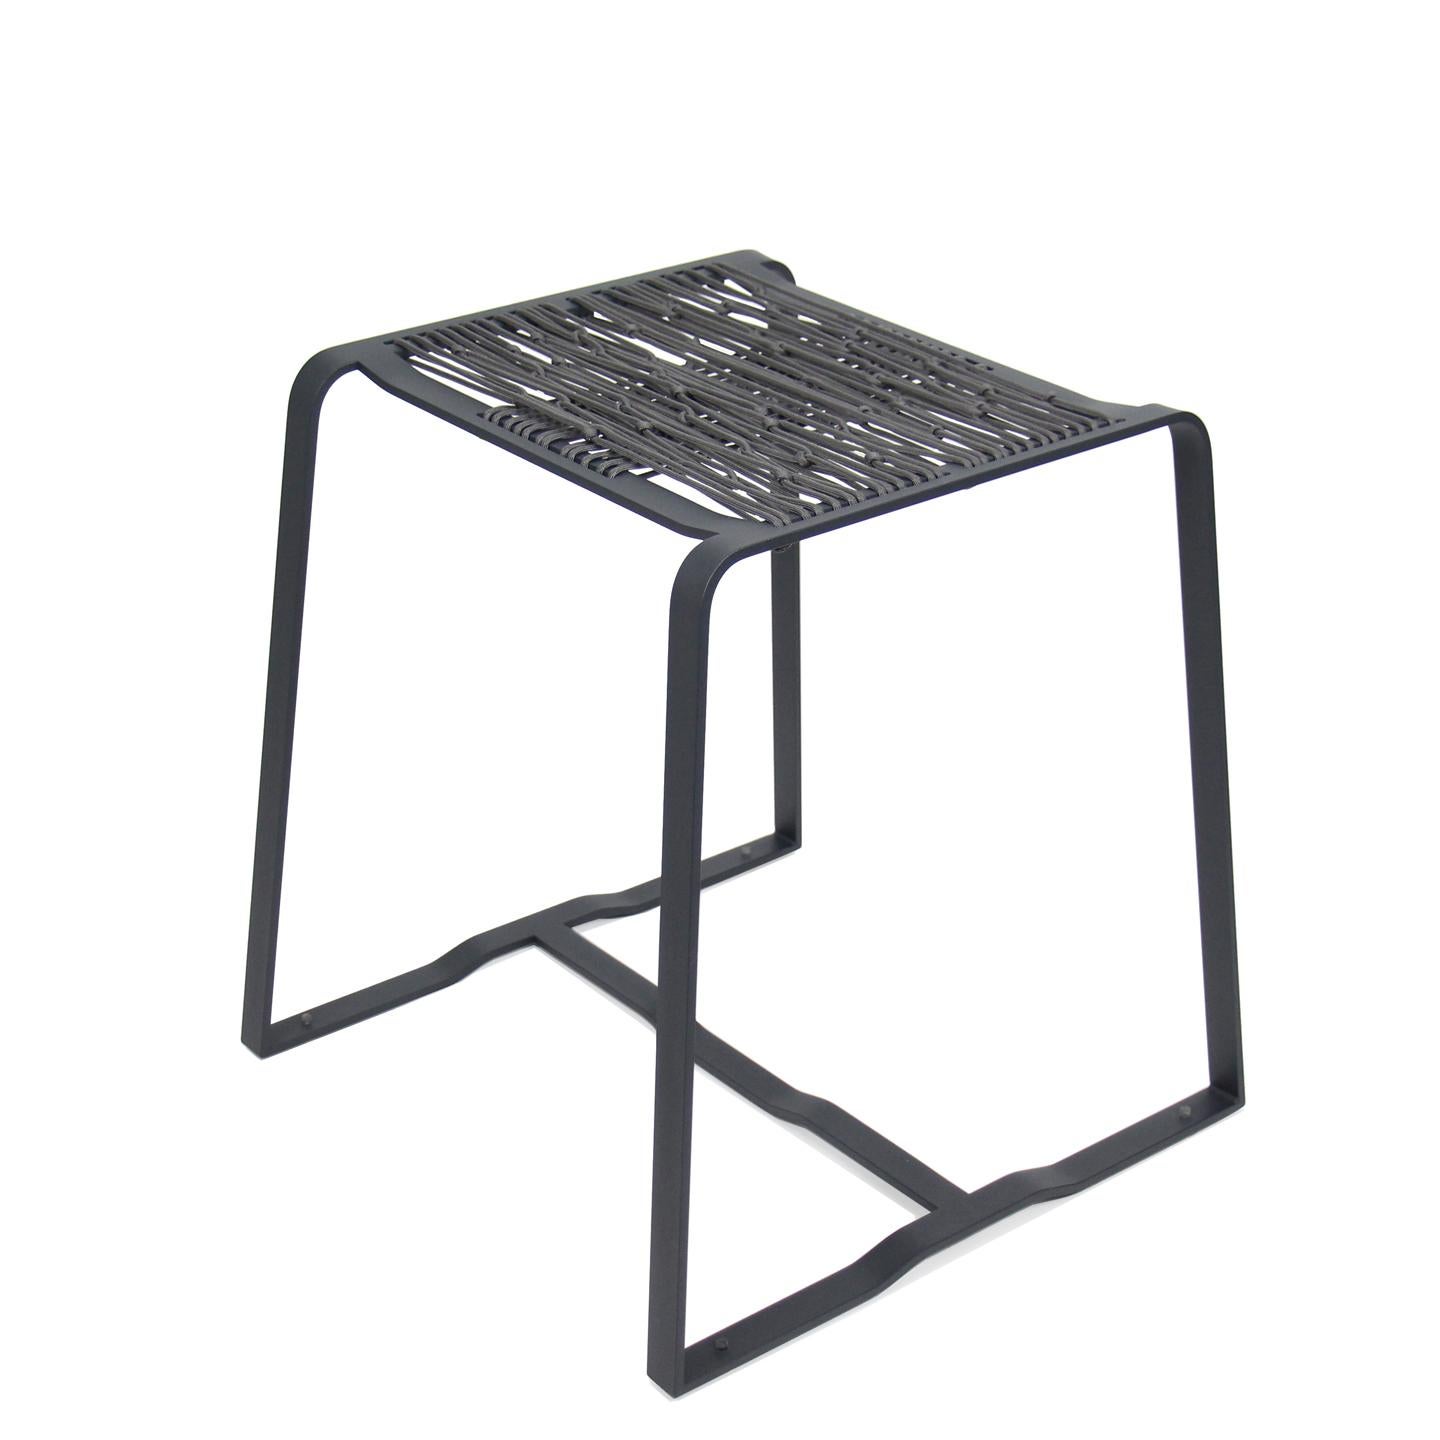 The Merkled Net stool uses the texture and strength of knotting in combination with a machined and welded steel frame to create a minimal, flexible, and comfortable seat. 

Size: W 18 3/8